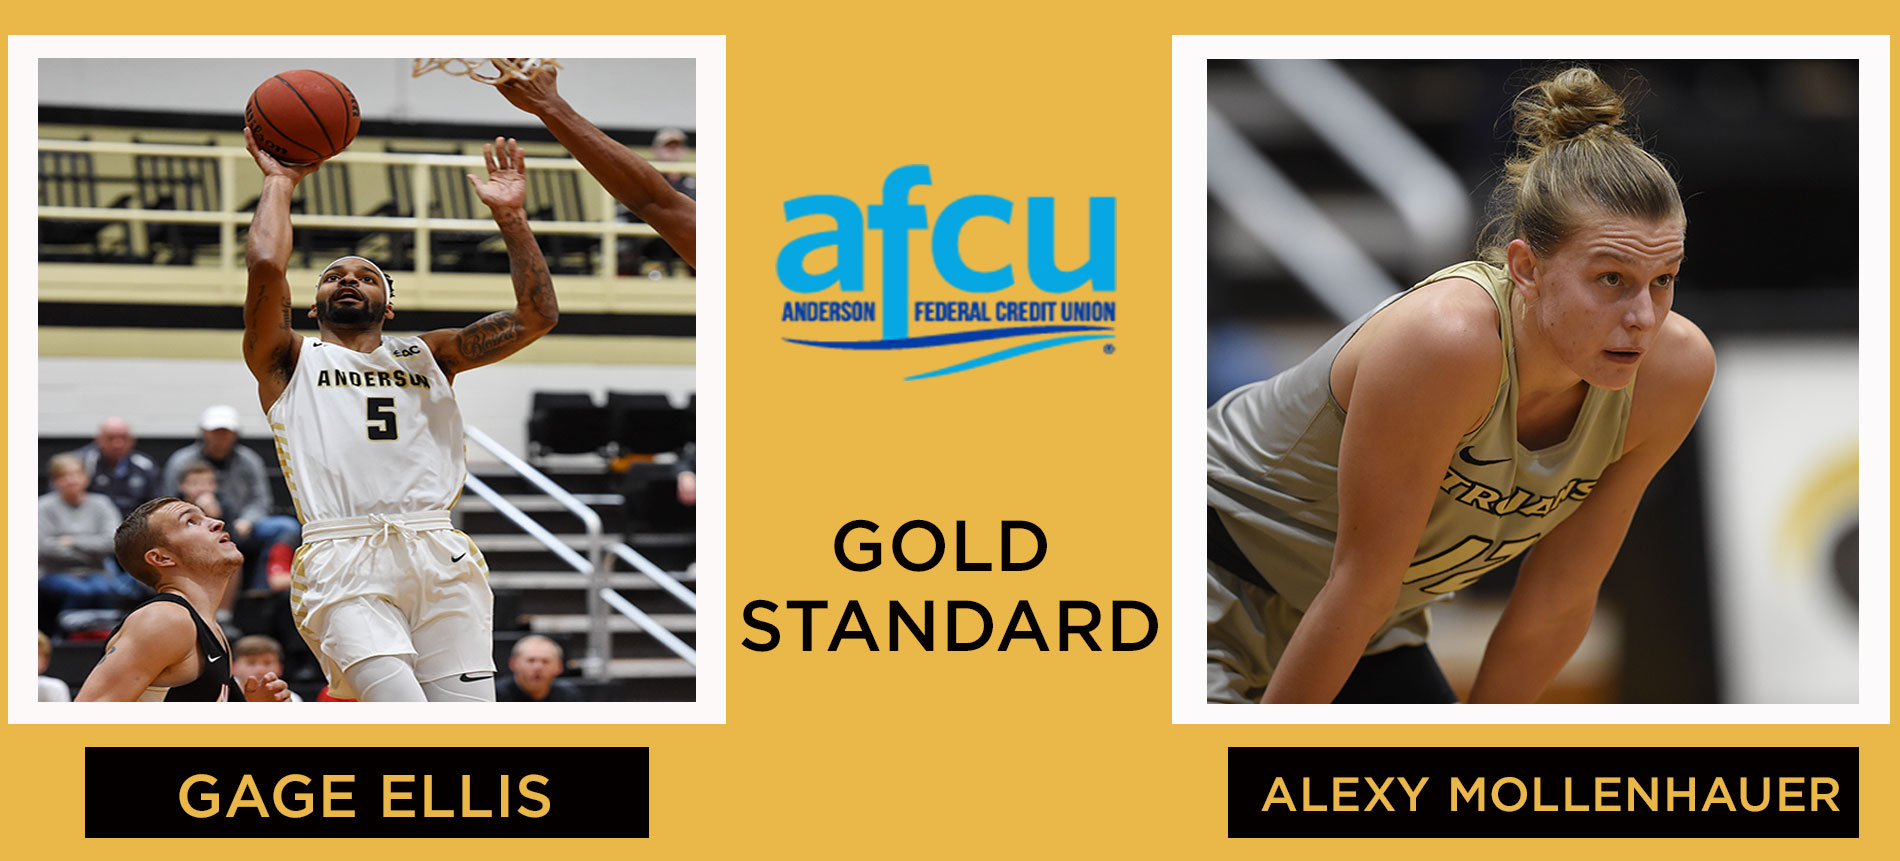 Women’s Basketball’s Alexy Mollenhauer and Men’s Basketball’s Gage Ellis Named to the AFCU Gold Standard